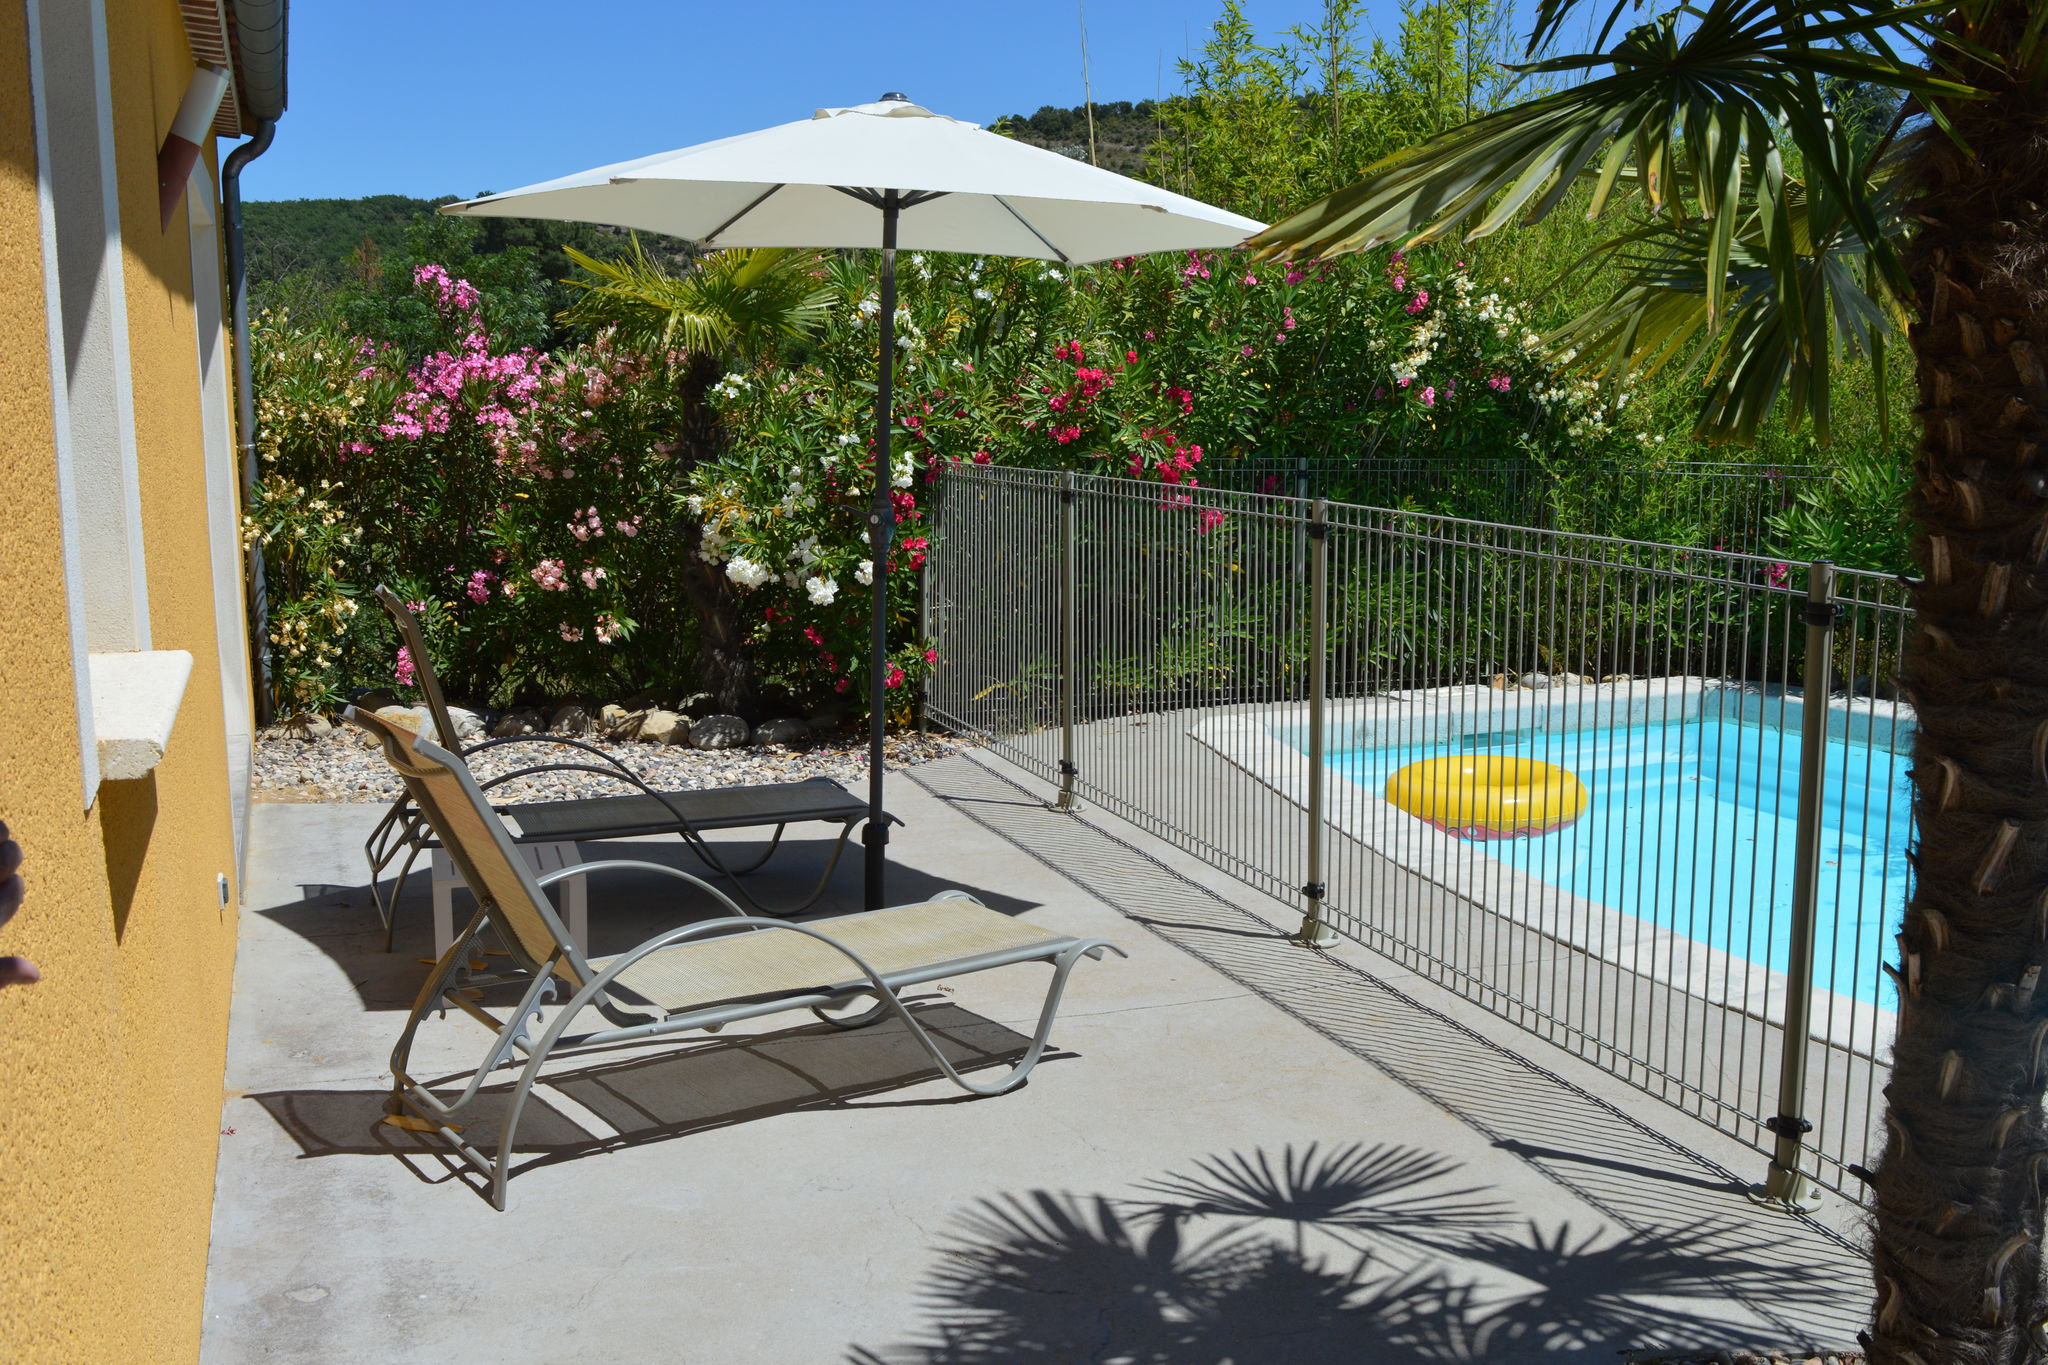 Comfortable villa with private swimming pool and close to the Ardèche River